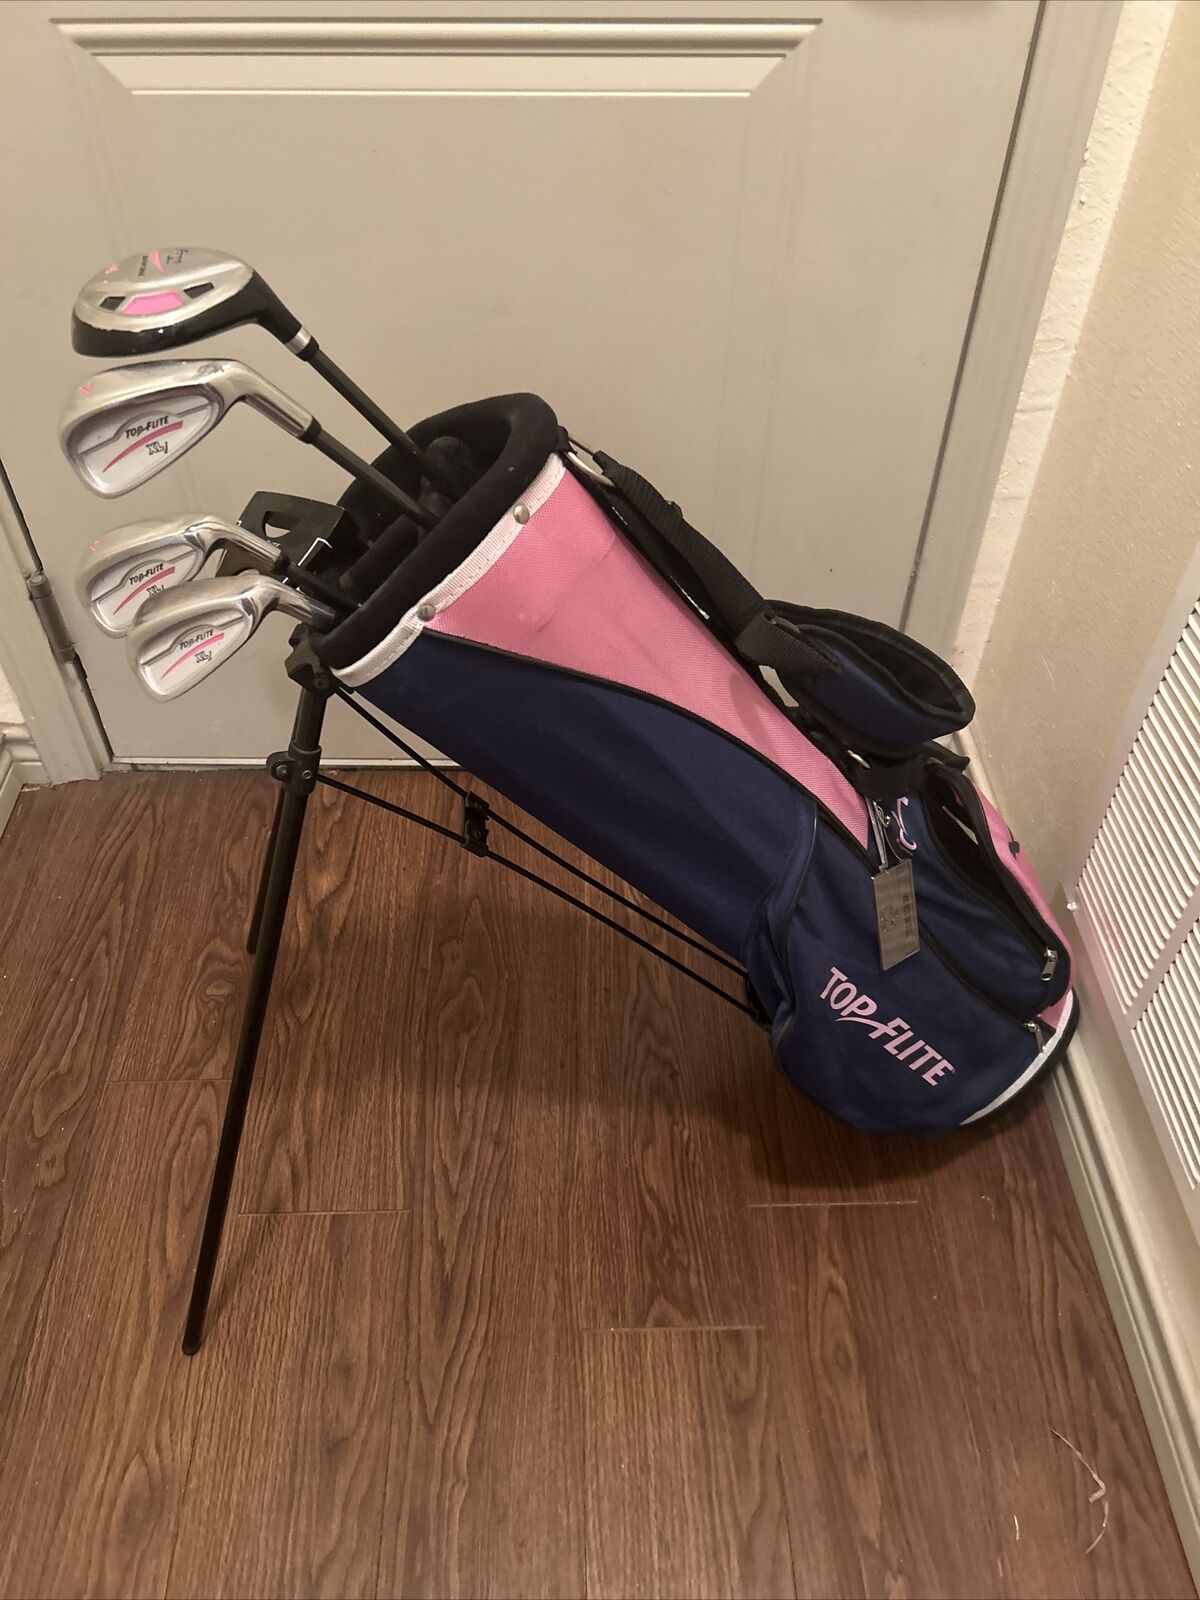 Top Flight Xlj Junior Golf Club Set Pink And Black With Bag 5 Total Clubs